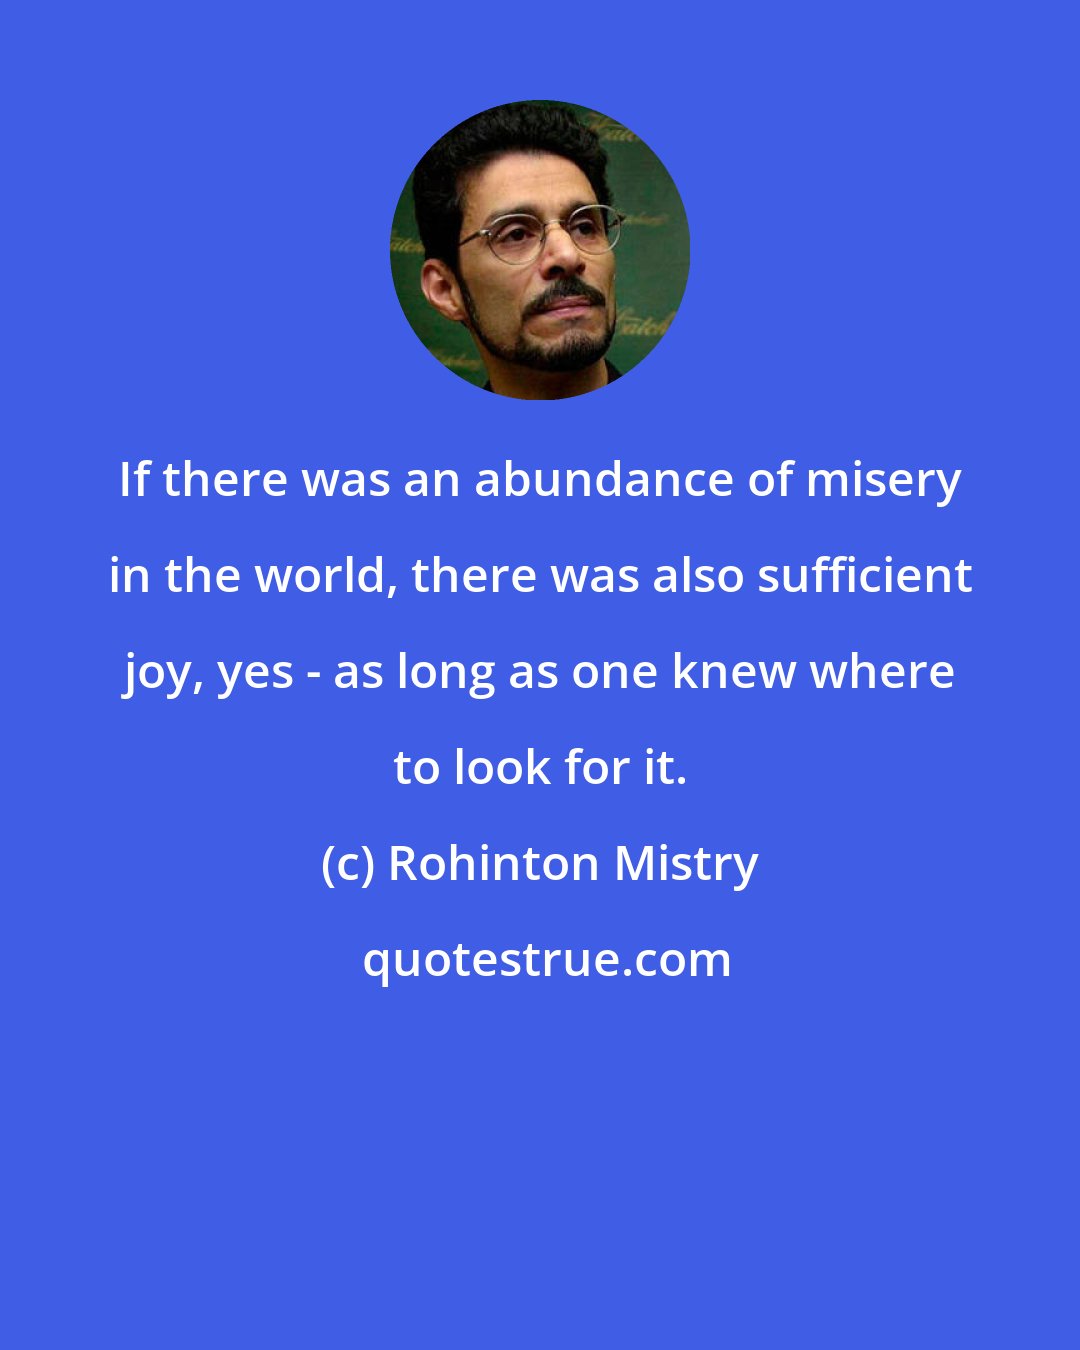 Rohinton Mistry: If there was an abundance of misery in the world, there was also sufficient joy, yes - as long as one knew where to look for it.